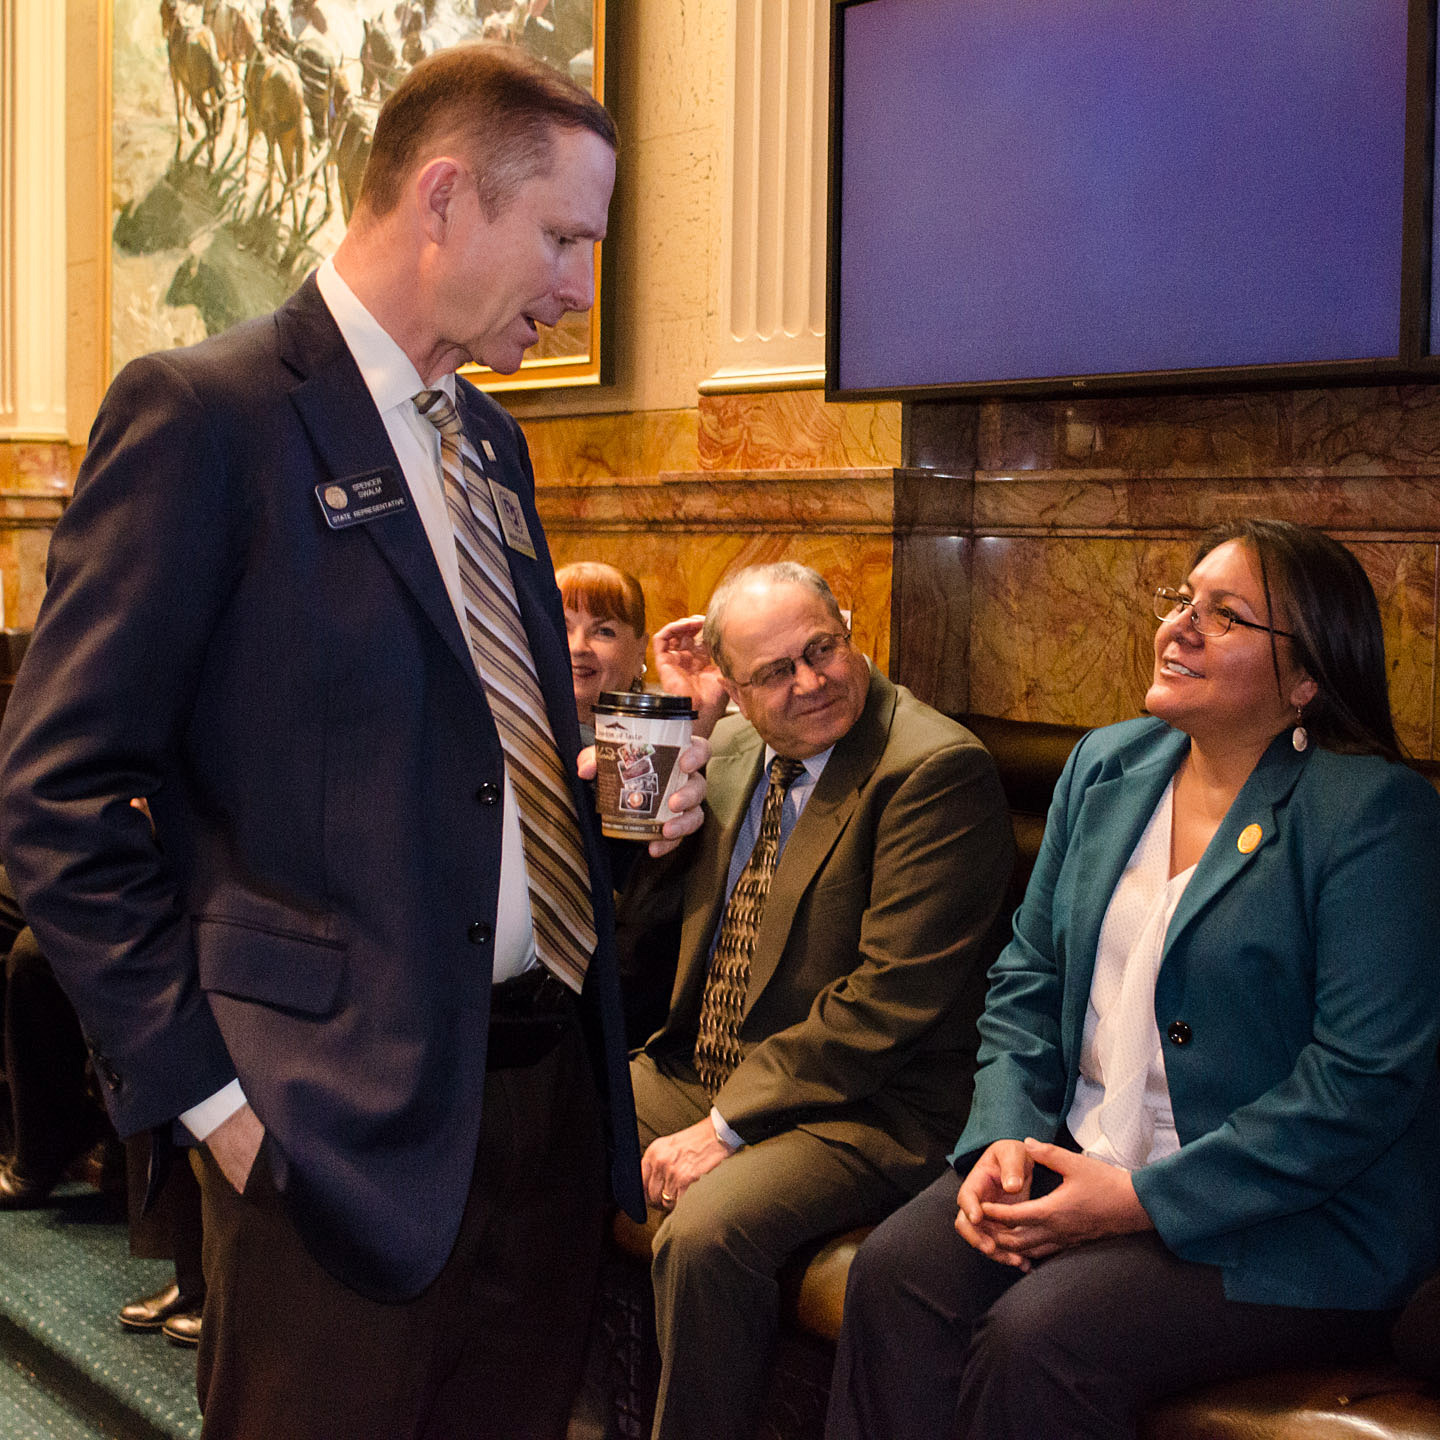 Southern Ute Council Lady Pathimi Goddtracks converses with state Rep. Spencer Swalm, R-Centennial, and Ignacio School District Superintendent Rocco Fuschetto prior to the morning welcome in the state Capitol